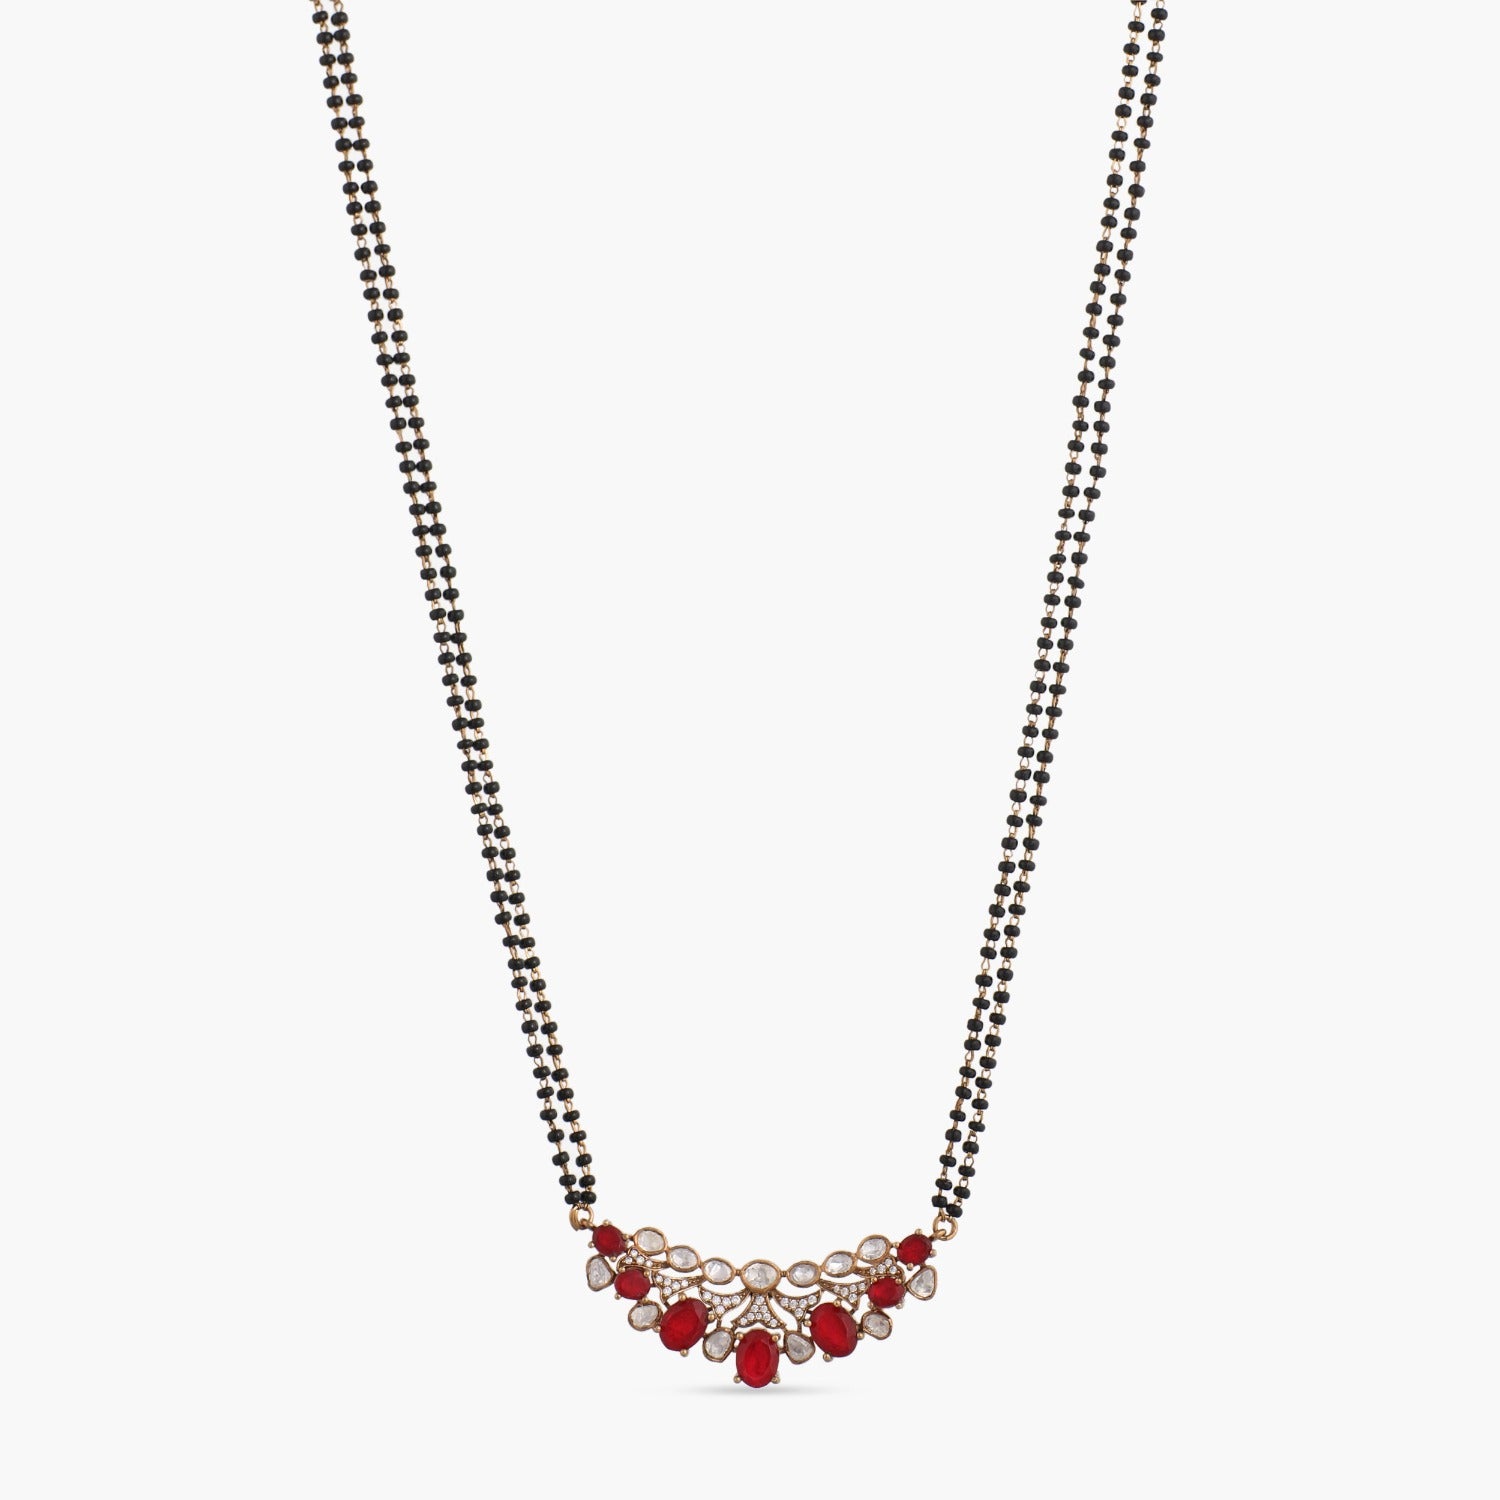 Ruby Moissanite Silver Mangalsutra Necklace Set